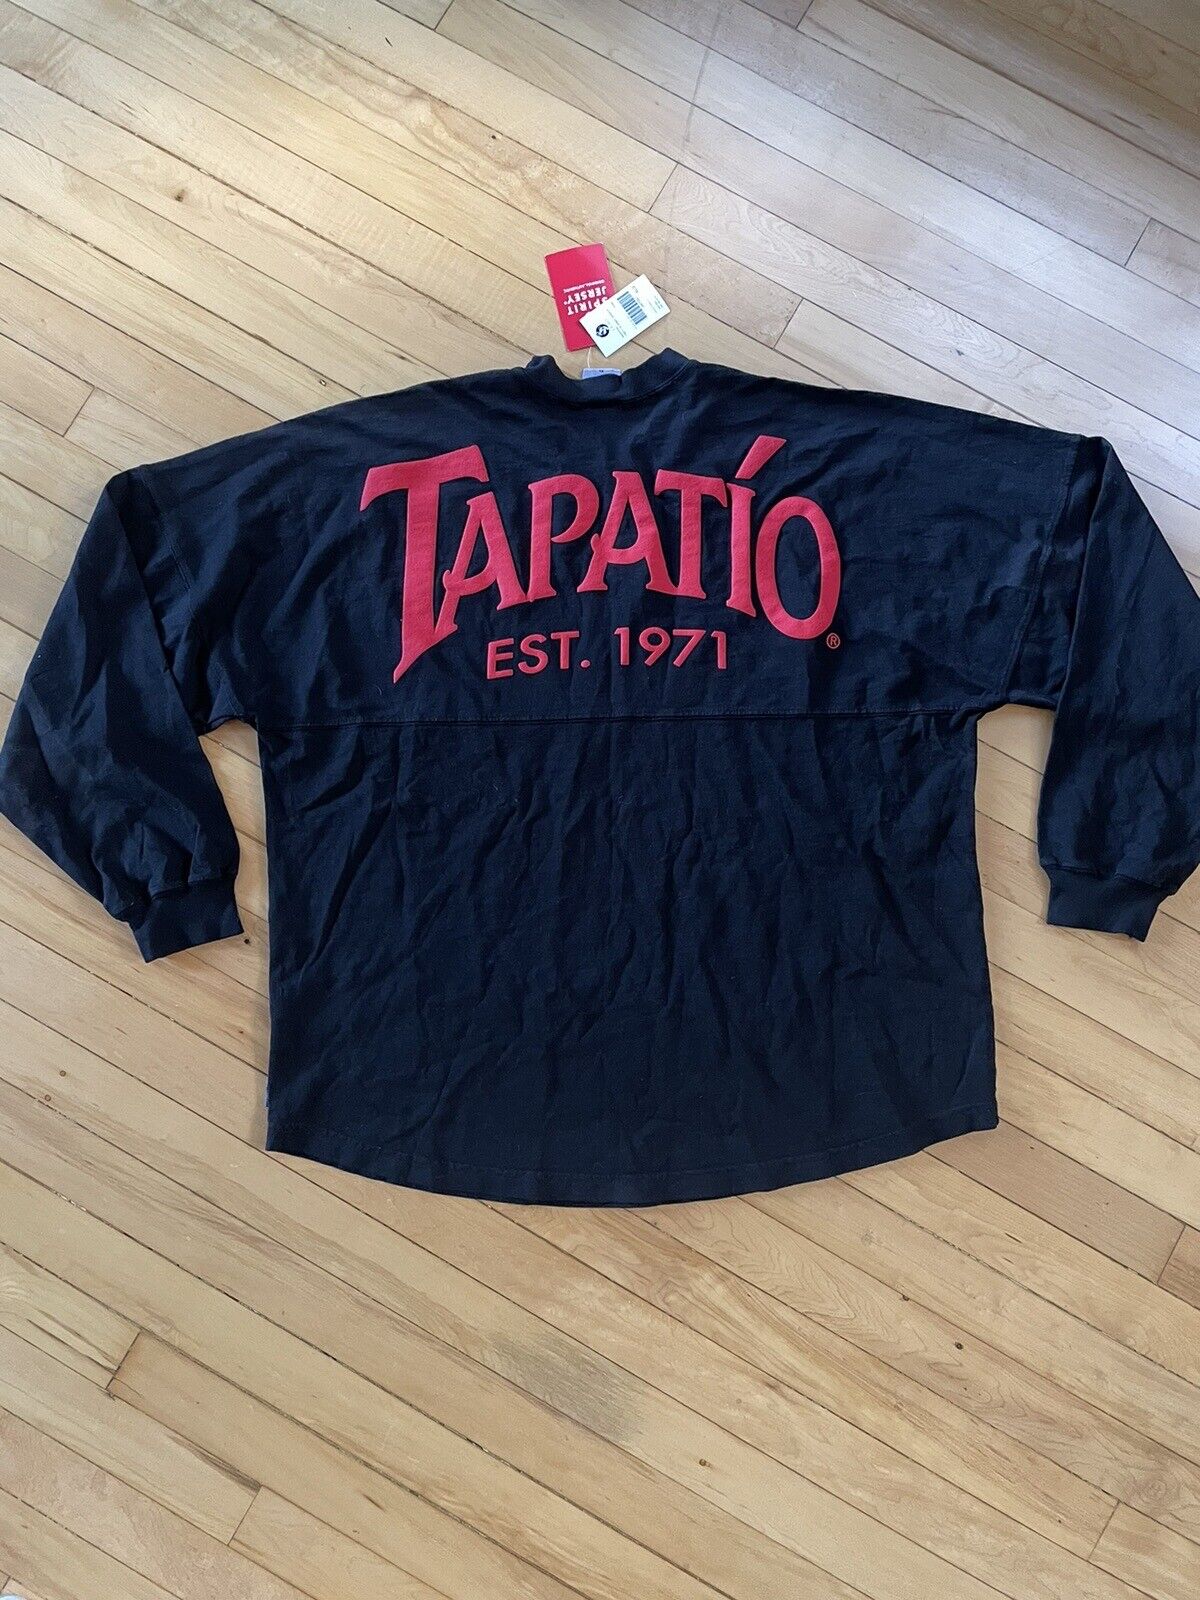 New w Tags TAPATIO HOT SAUCE Official Spirit Jersey Long Sleeves Shirt Size XL